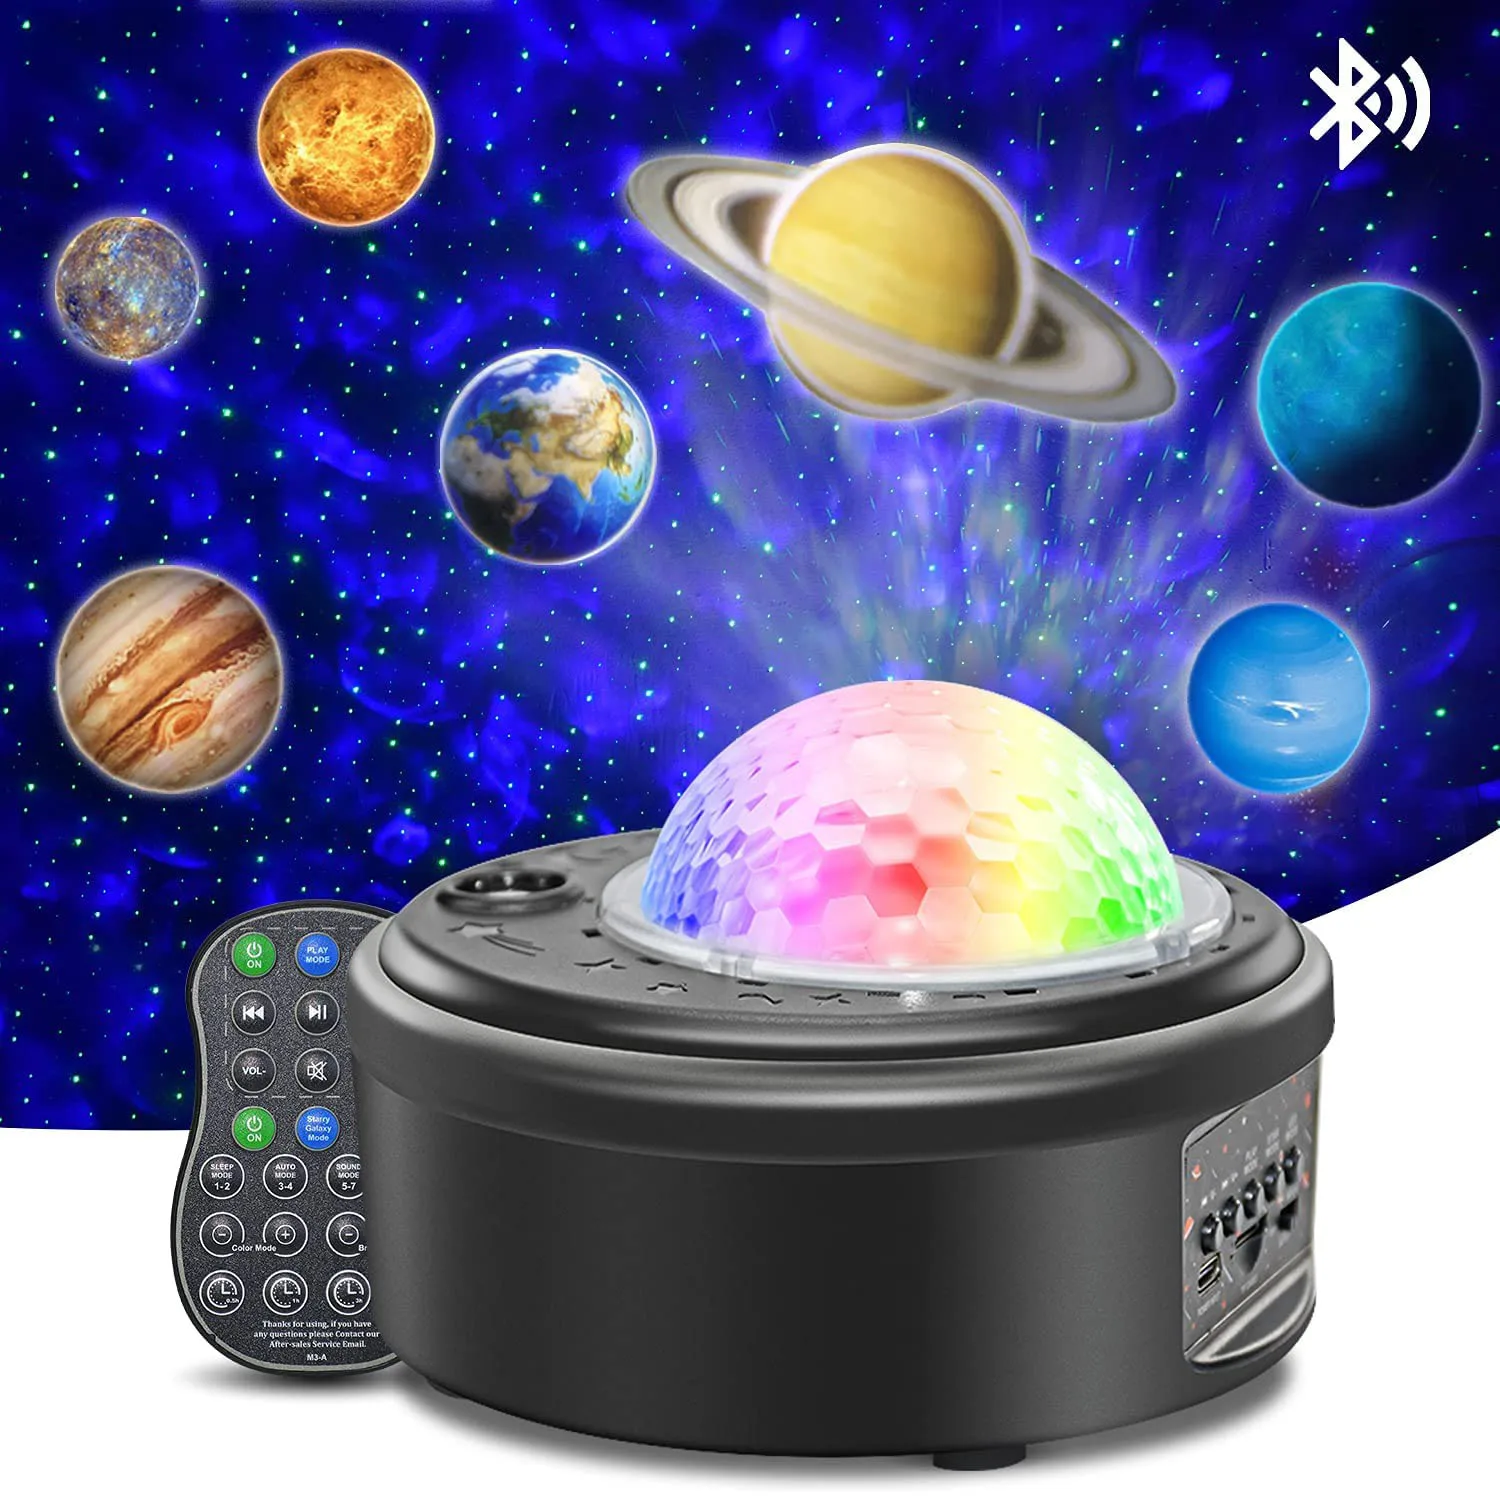 night stand lamps 10 Planet Colorful Projector Lights Galaxy Starry Bluetooth Speaker Rotating Night Light Led Lamp Christmas New Year Gift hatch night light